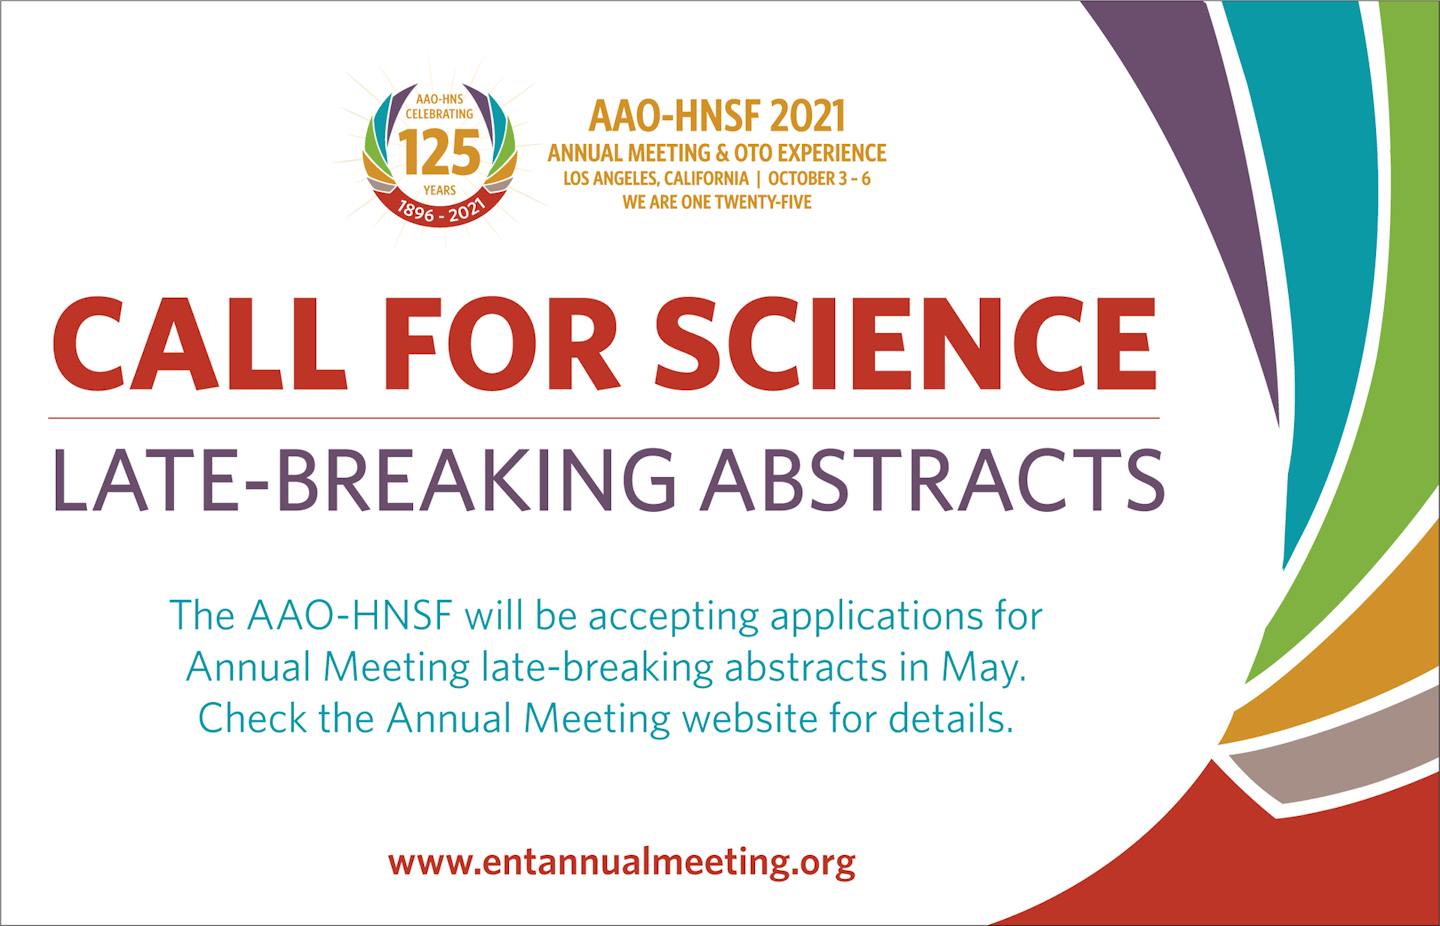 Call for Science LateBreaking Abstracts AAOHNSF Bulletin